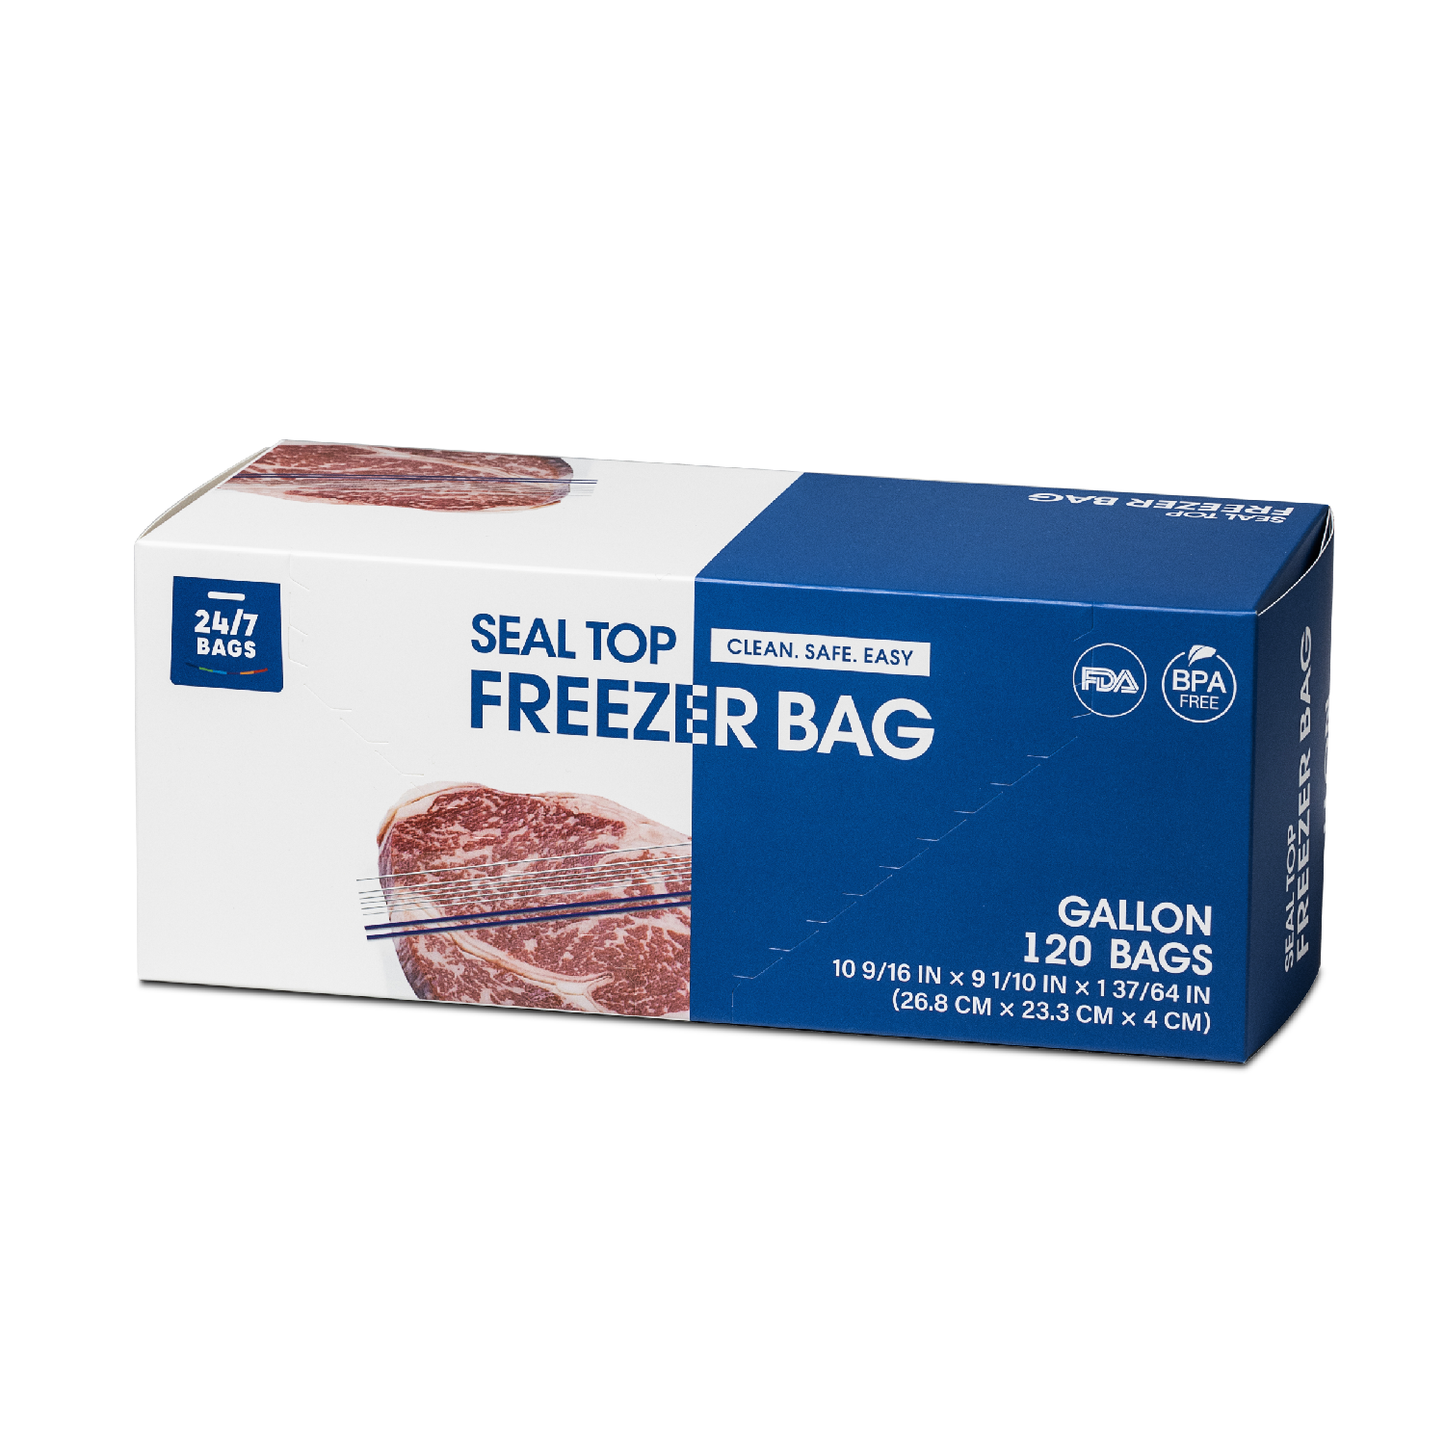 Double Zip Freezer Food Storage Bags, Gallon/ 120 Count, Expandable Bottom and Writeable Calendar